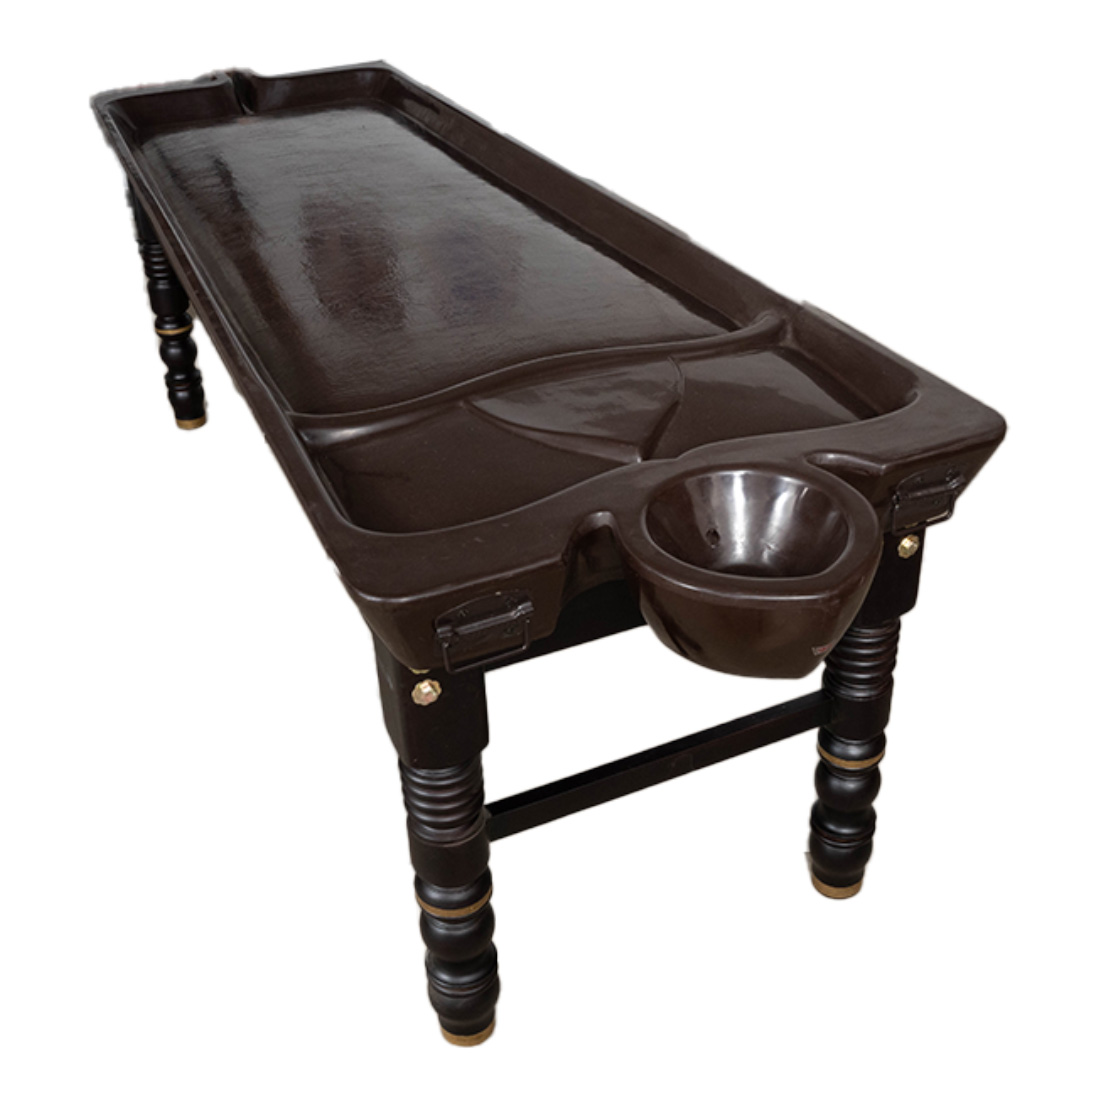 AVP Fibre or FRP Massage Bed for Ayurvedic massage and treatment